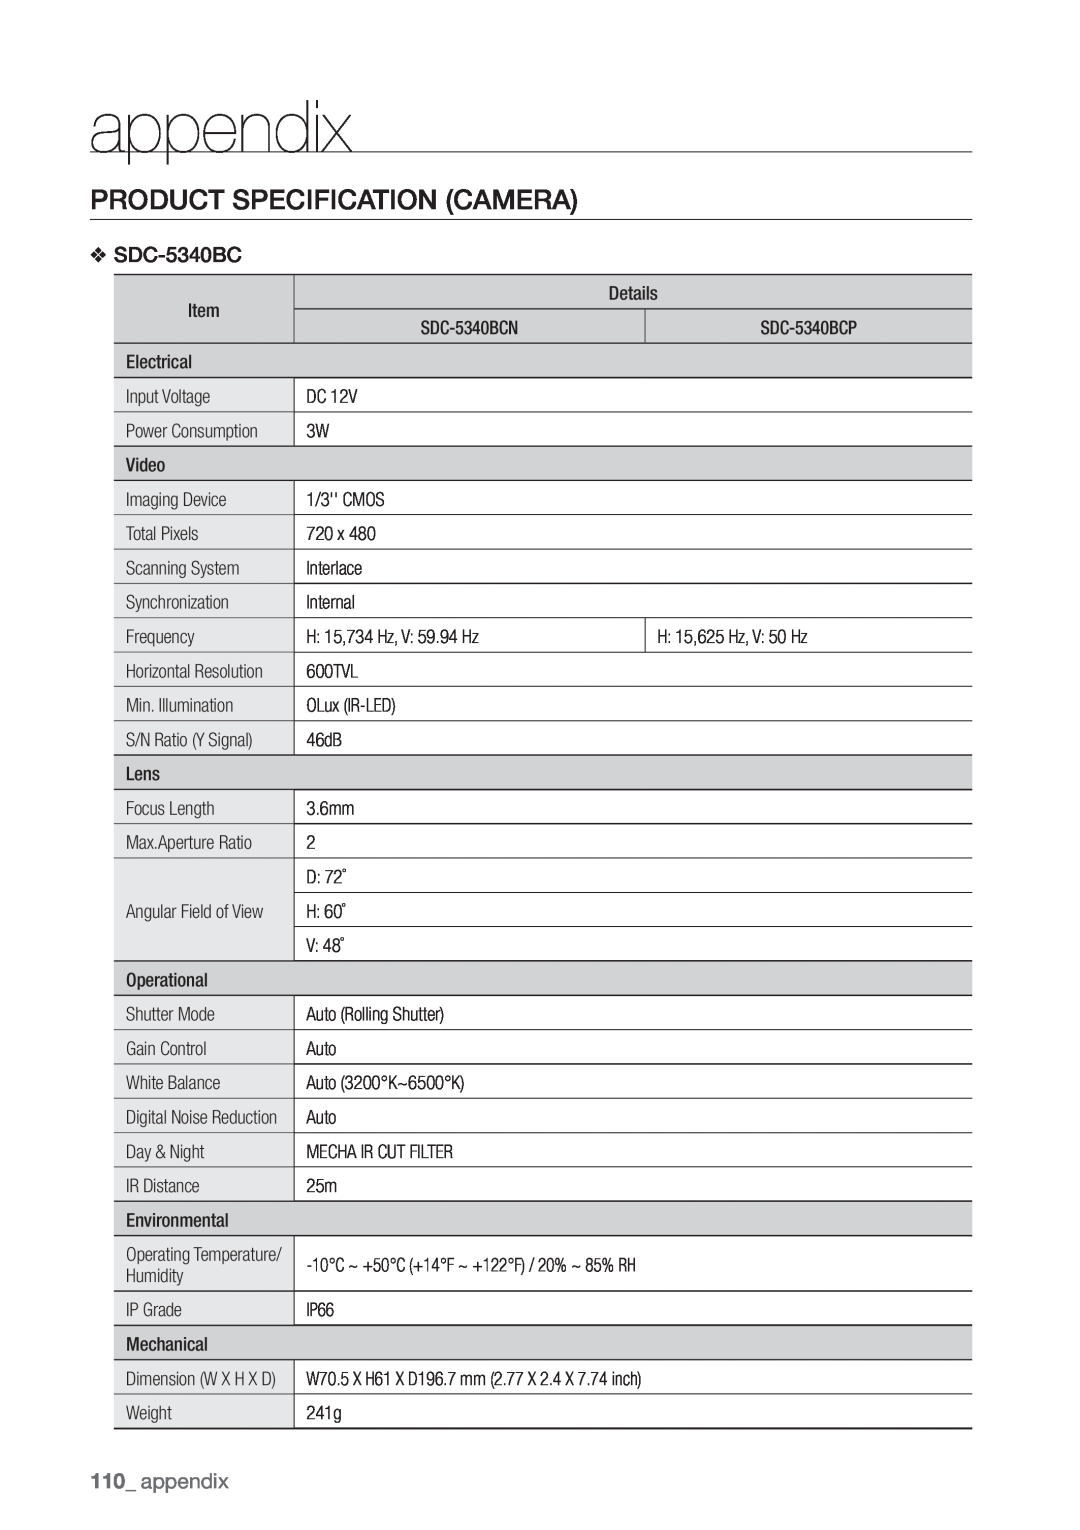 Samsung SDR3100 user manual Product Specification Camera, SDC-5340BC, 110_ appendix 